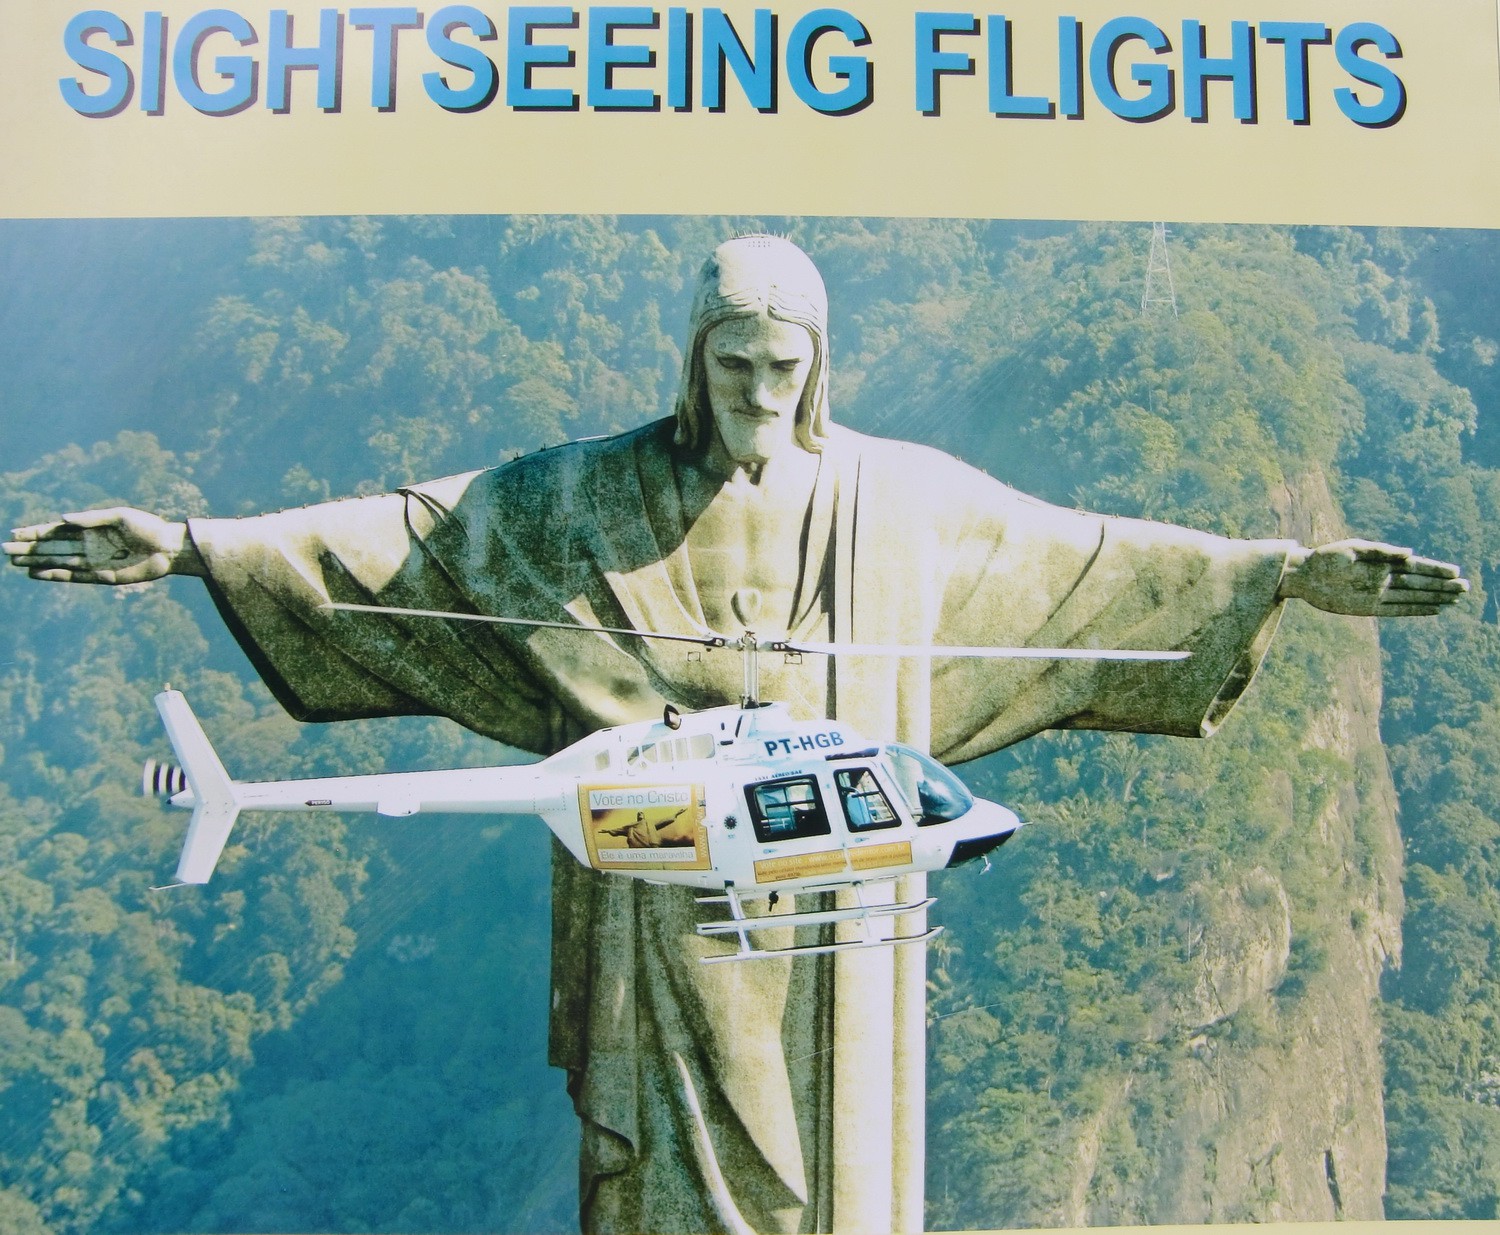 Adverising poster for helicopter flights